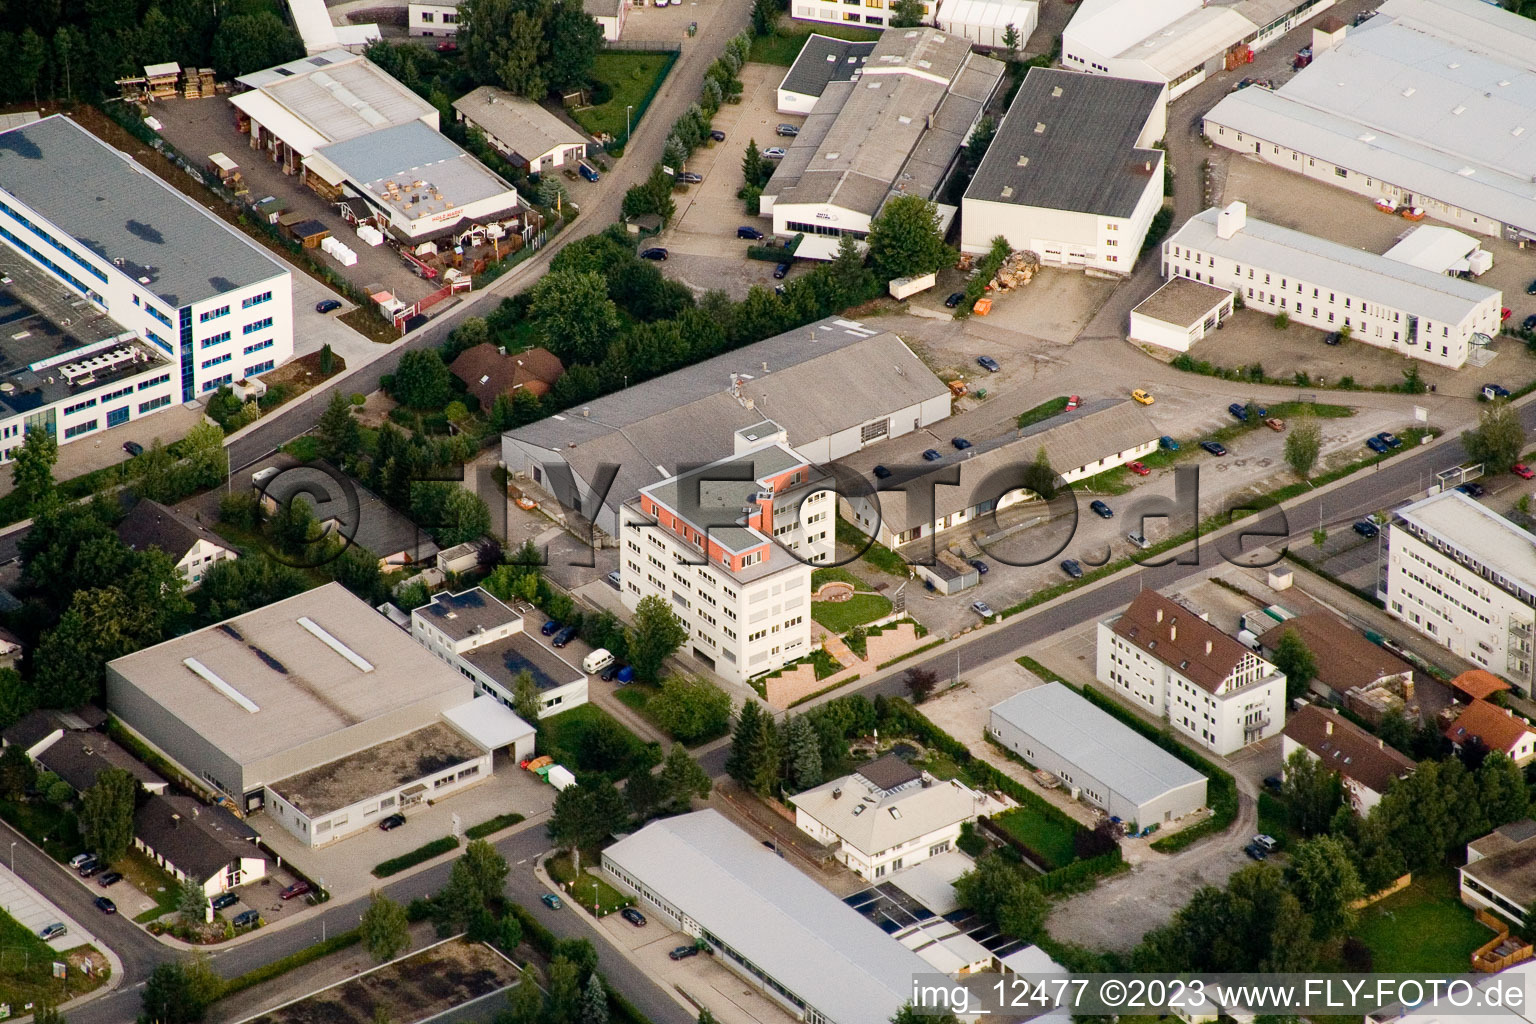 Ittersbach, industrial area in the district Im Stockmädle in Karlsbad in the state Baden-Wuerttemberg, Germany from the drone perspective